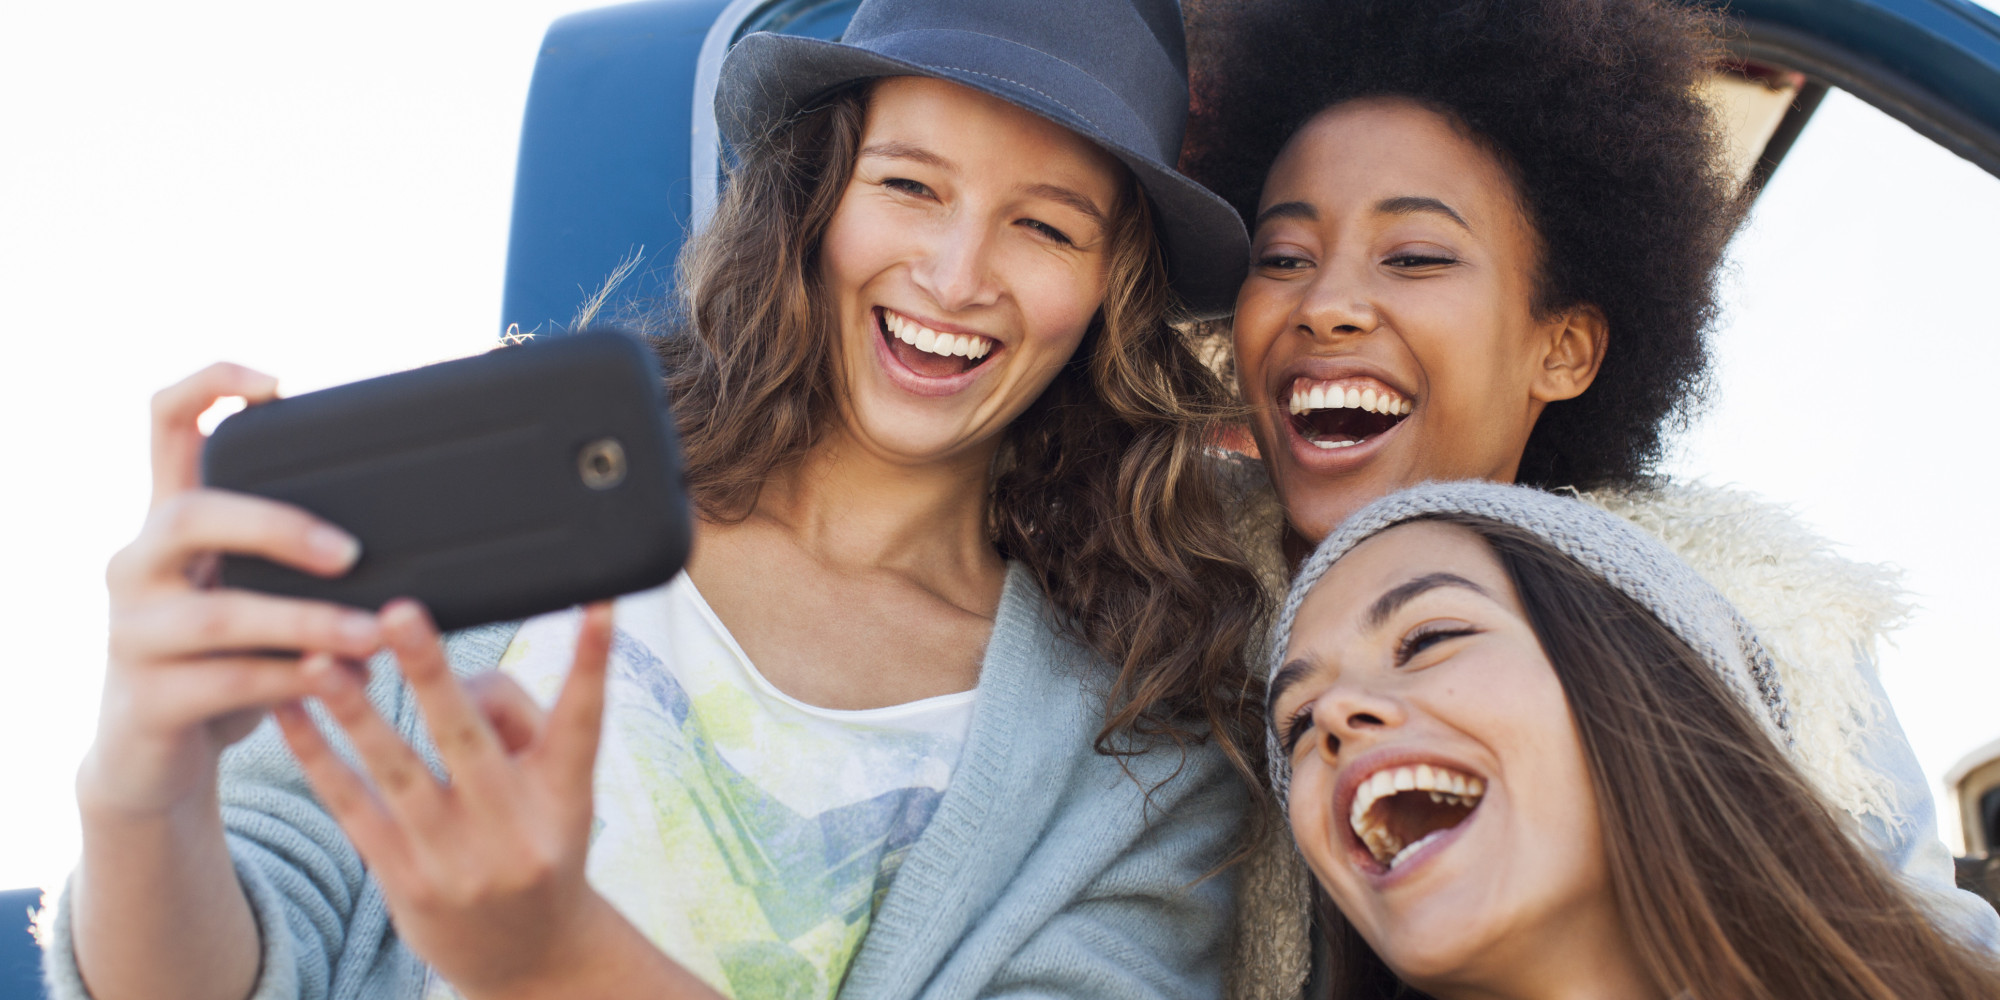 What your selfies can tell about your personality